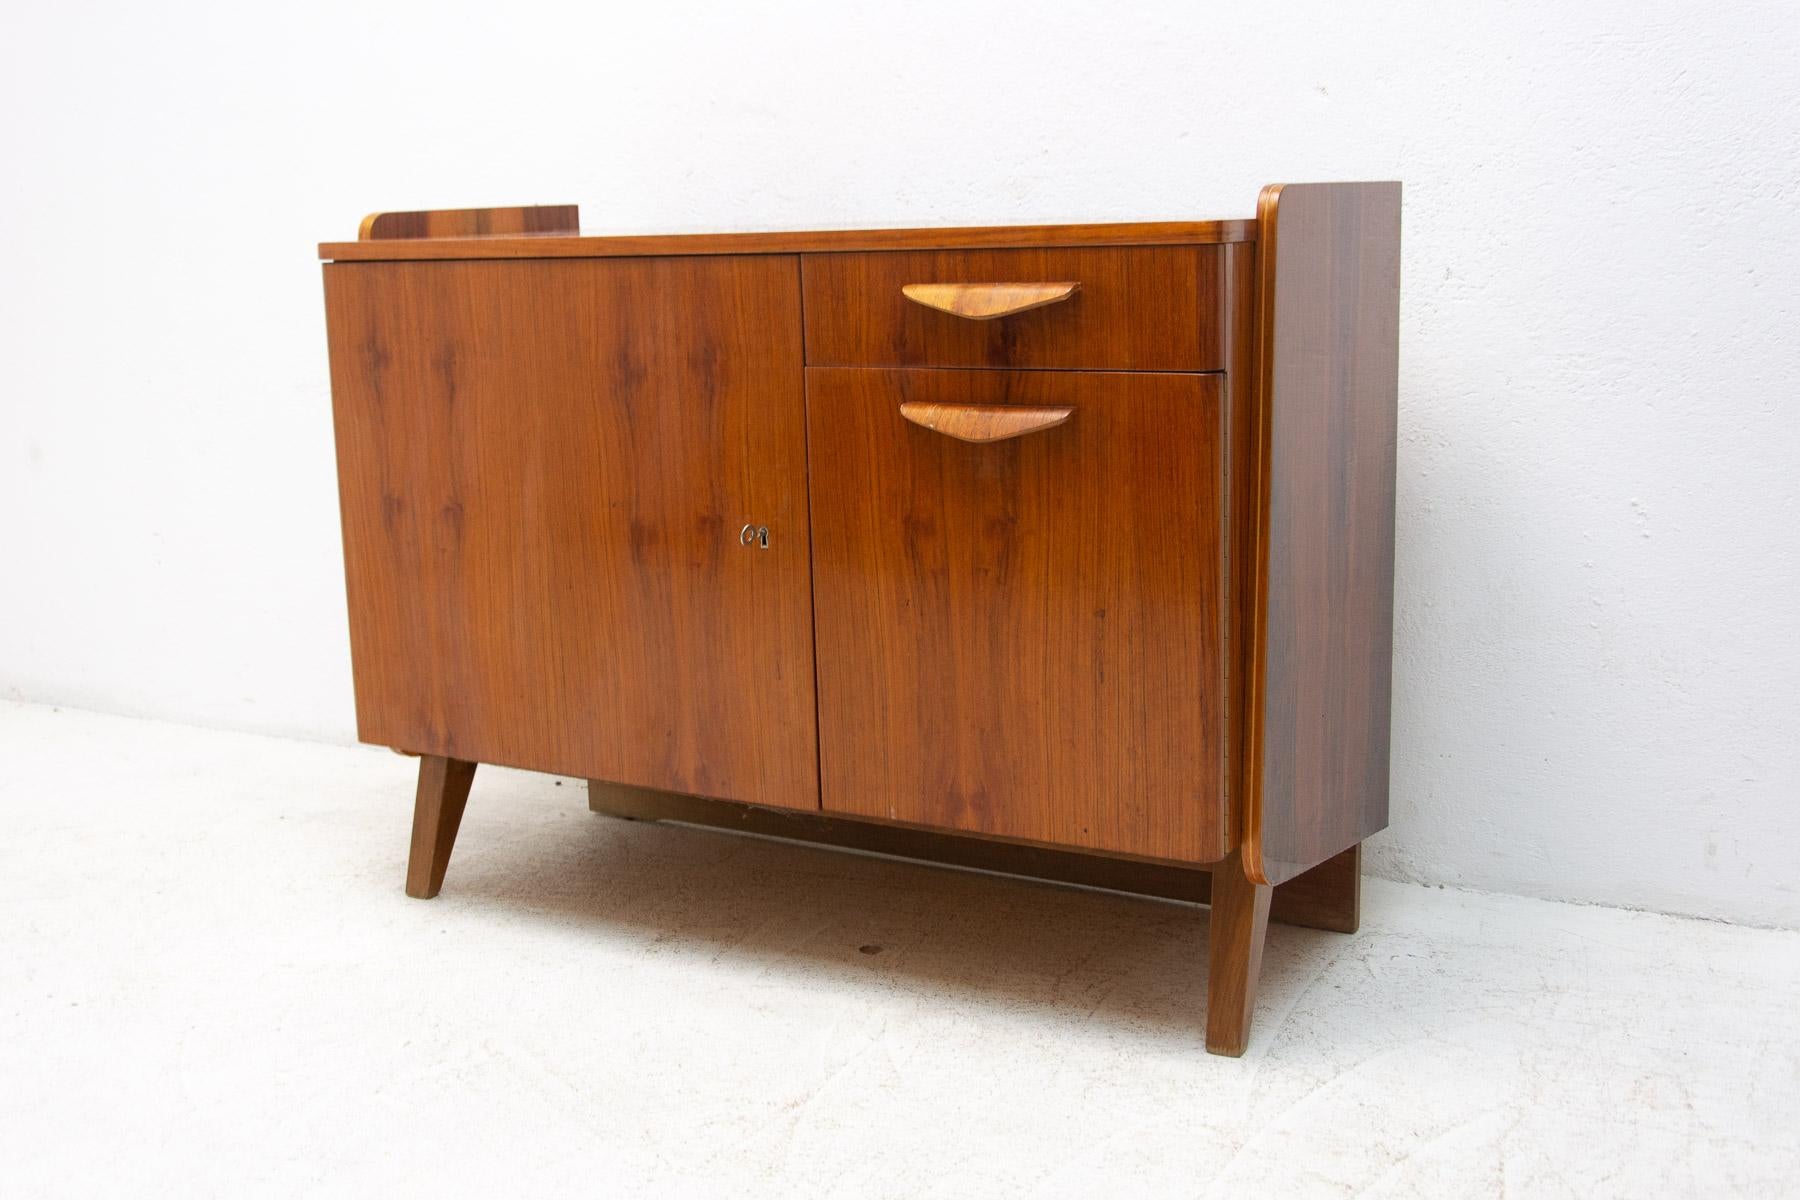 Mid-century vintage small cabinet or TV table from the 1960´s. It was designed by František Jirák and was manufactured by Tatra nábytok company in the former Czechoslovakia. Walnut veneer, plywood. In good condition.

Height: 79 cm

width: 105